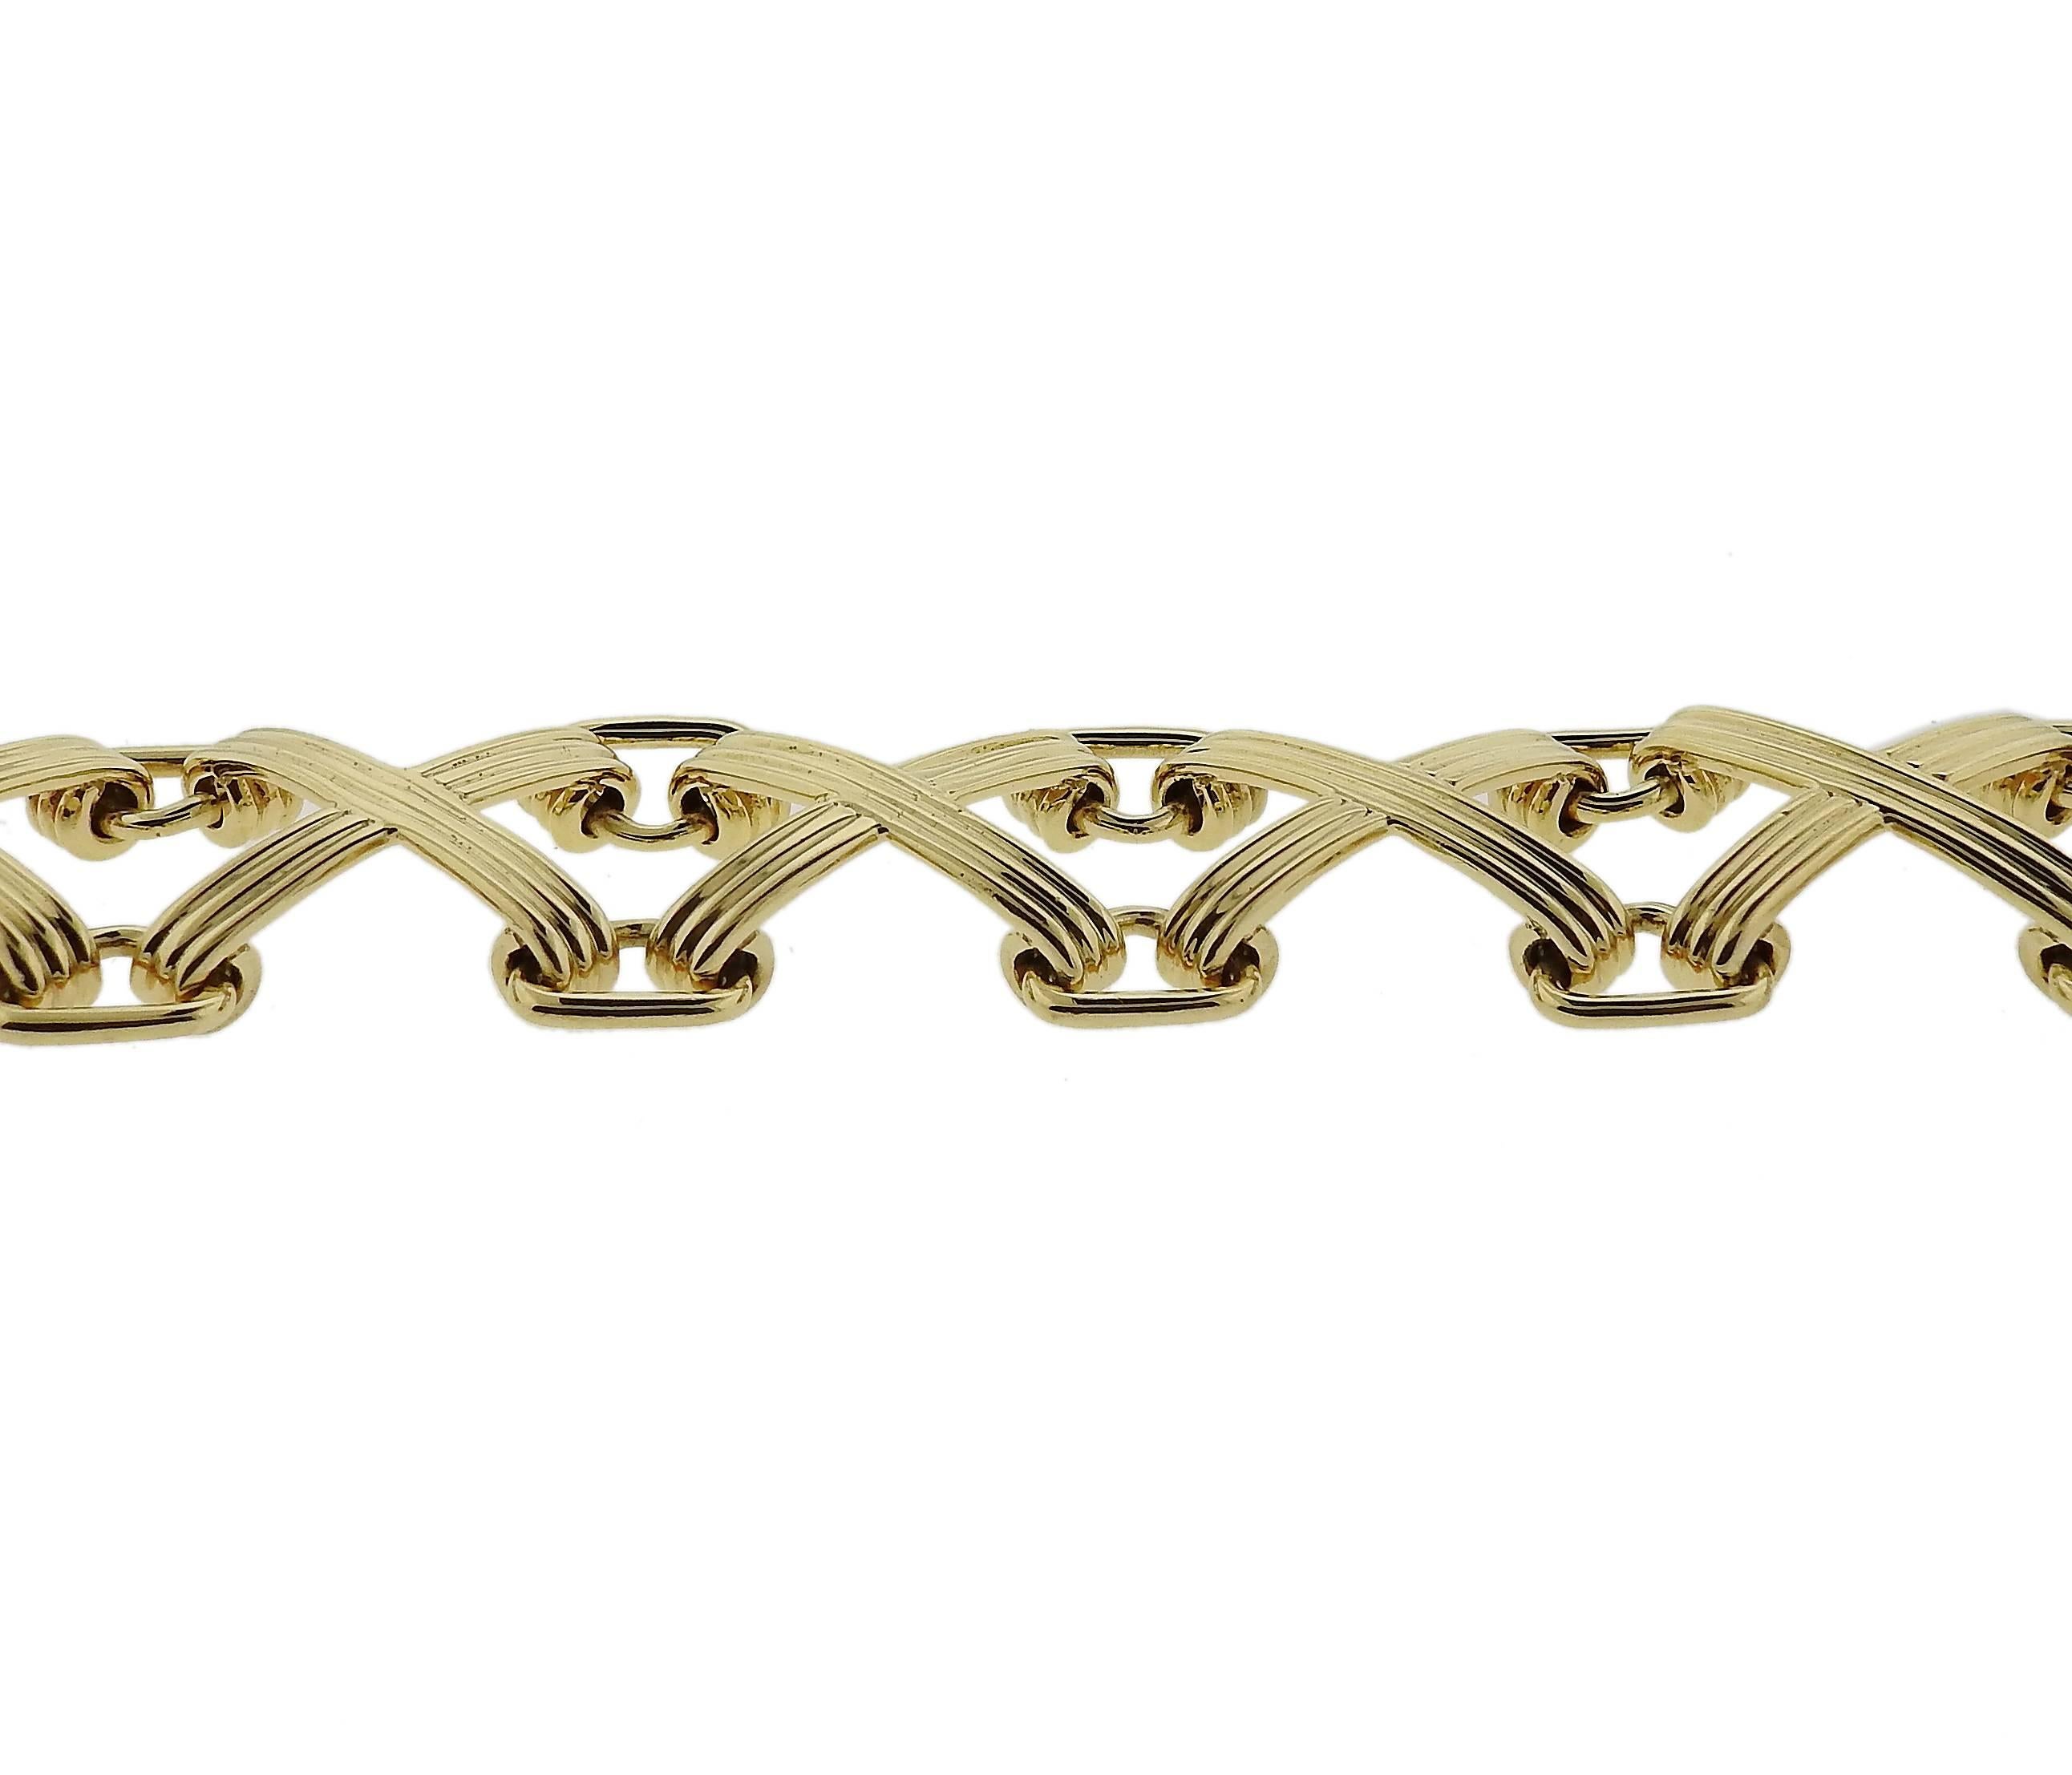 An 18k yellow gold bracelet, crafted by Jean Schlumberger for Tiffany & Co. Bracelet is 7 1/4" long and 21mm wide , weighs 47.6 grams. Marked: Tiffany & Co , Schlumberger 750. Current retail $8500